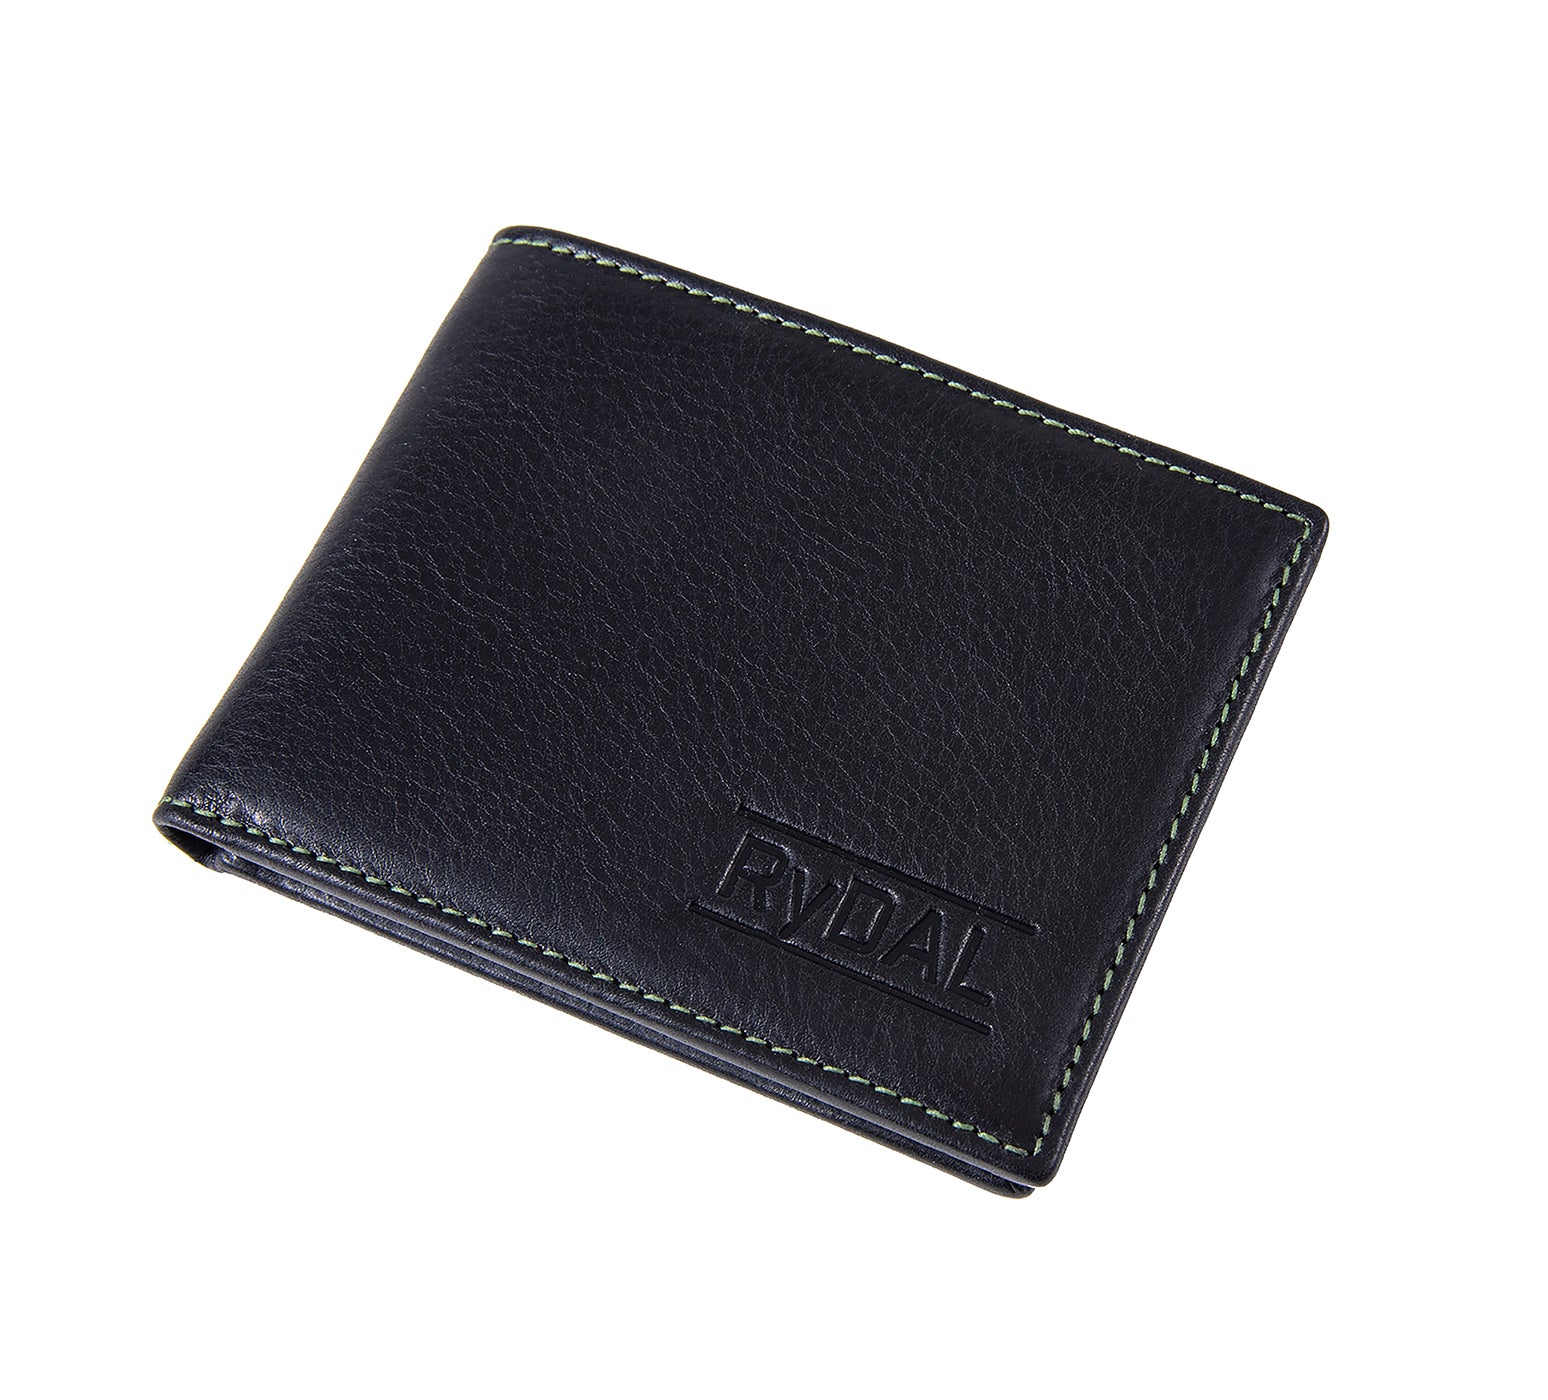 Mens Leather Wallet from Rydal in 'Black/Green' showing wallet closed.